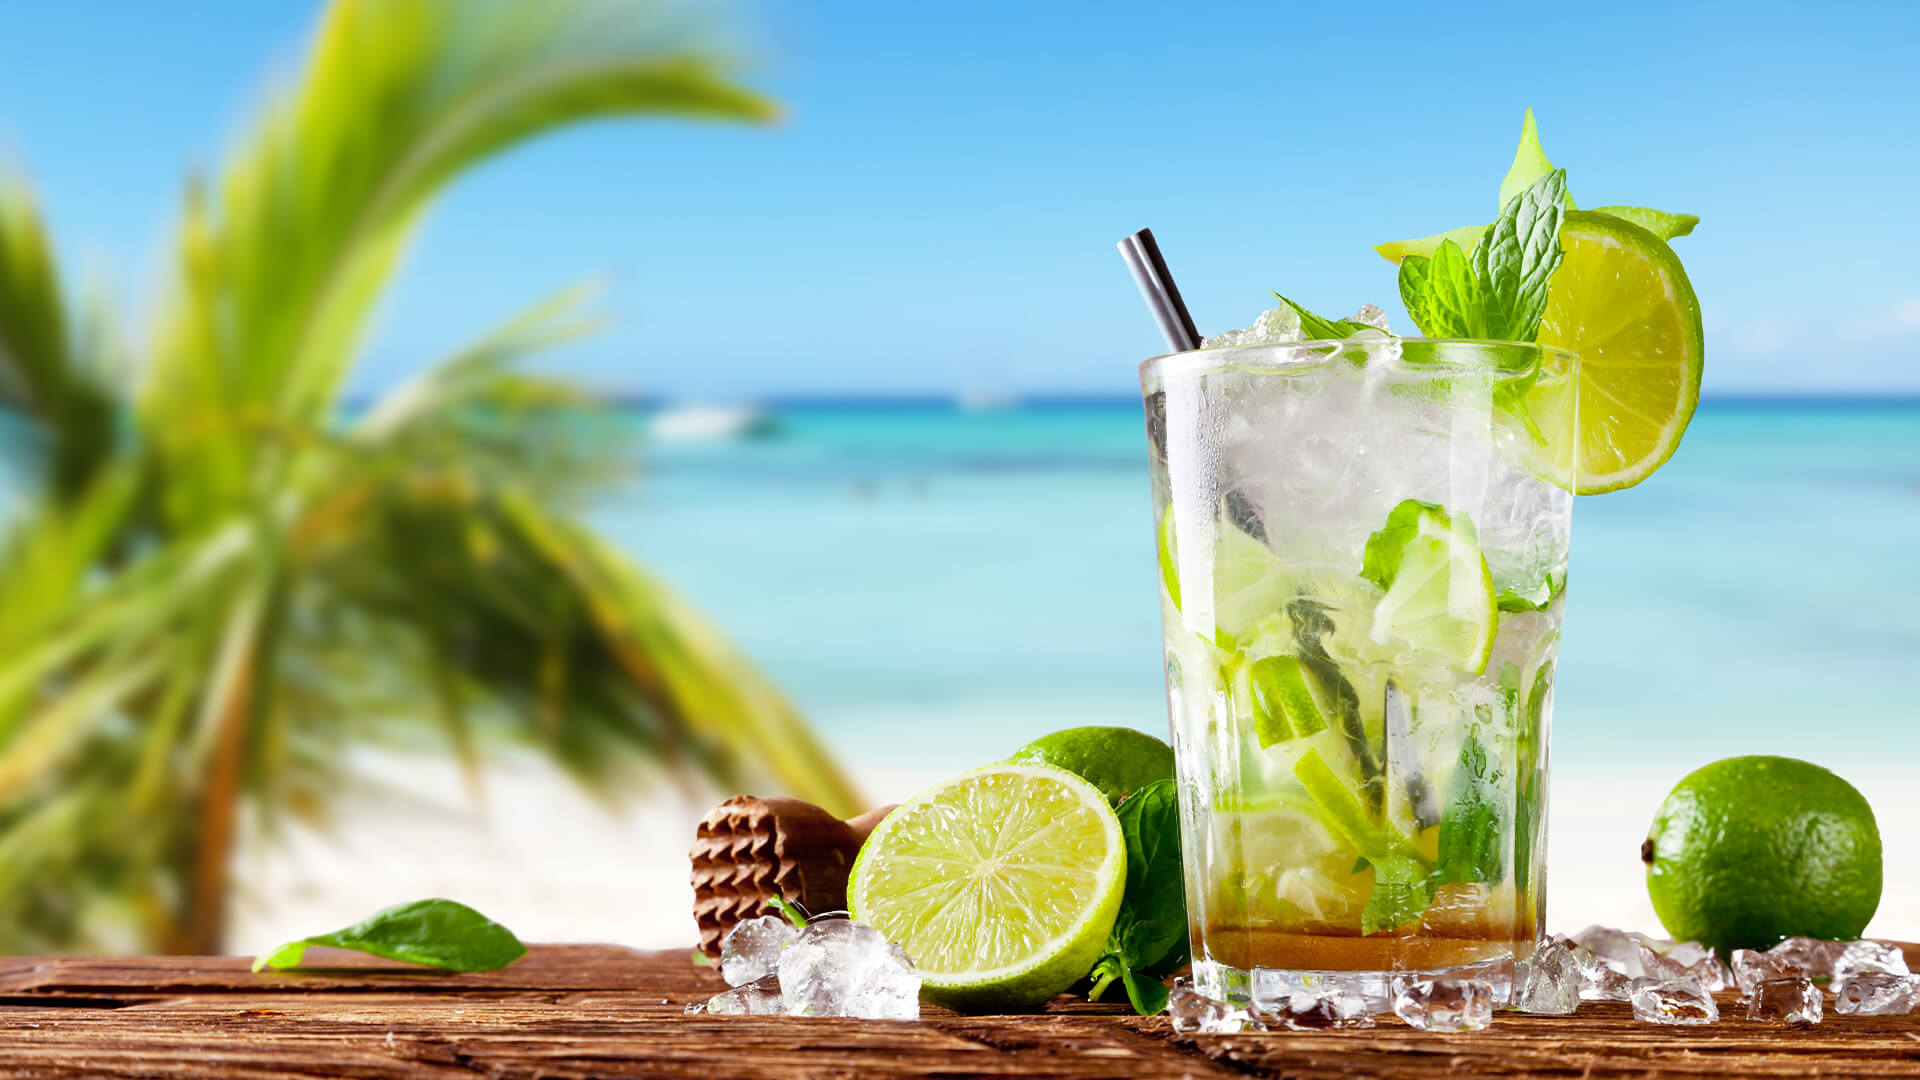 Mojito in the foreground, with palm trees and a beach on a sunny day in the background